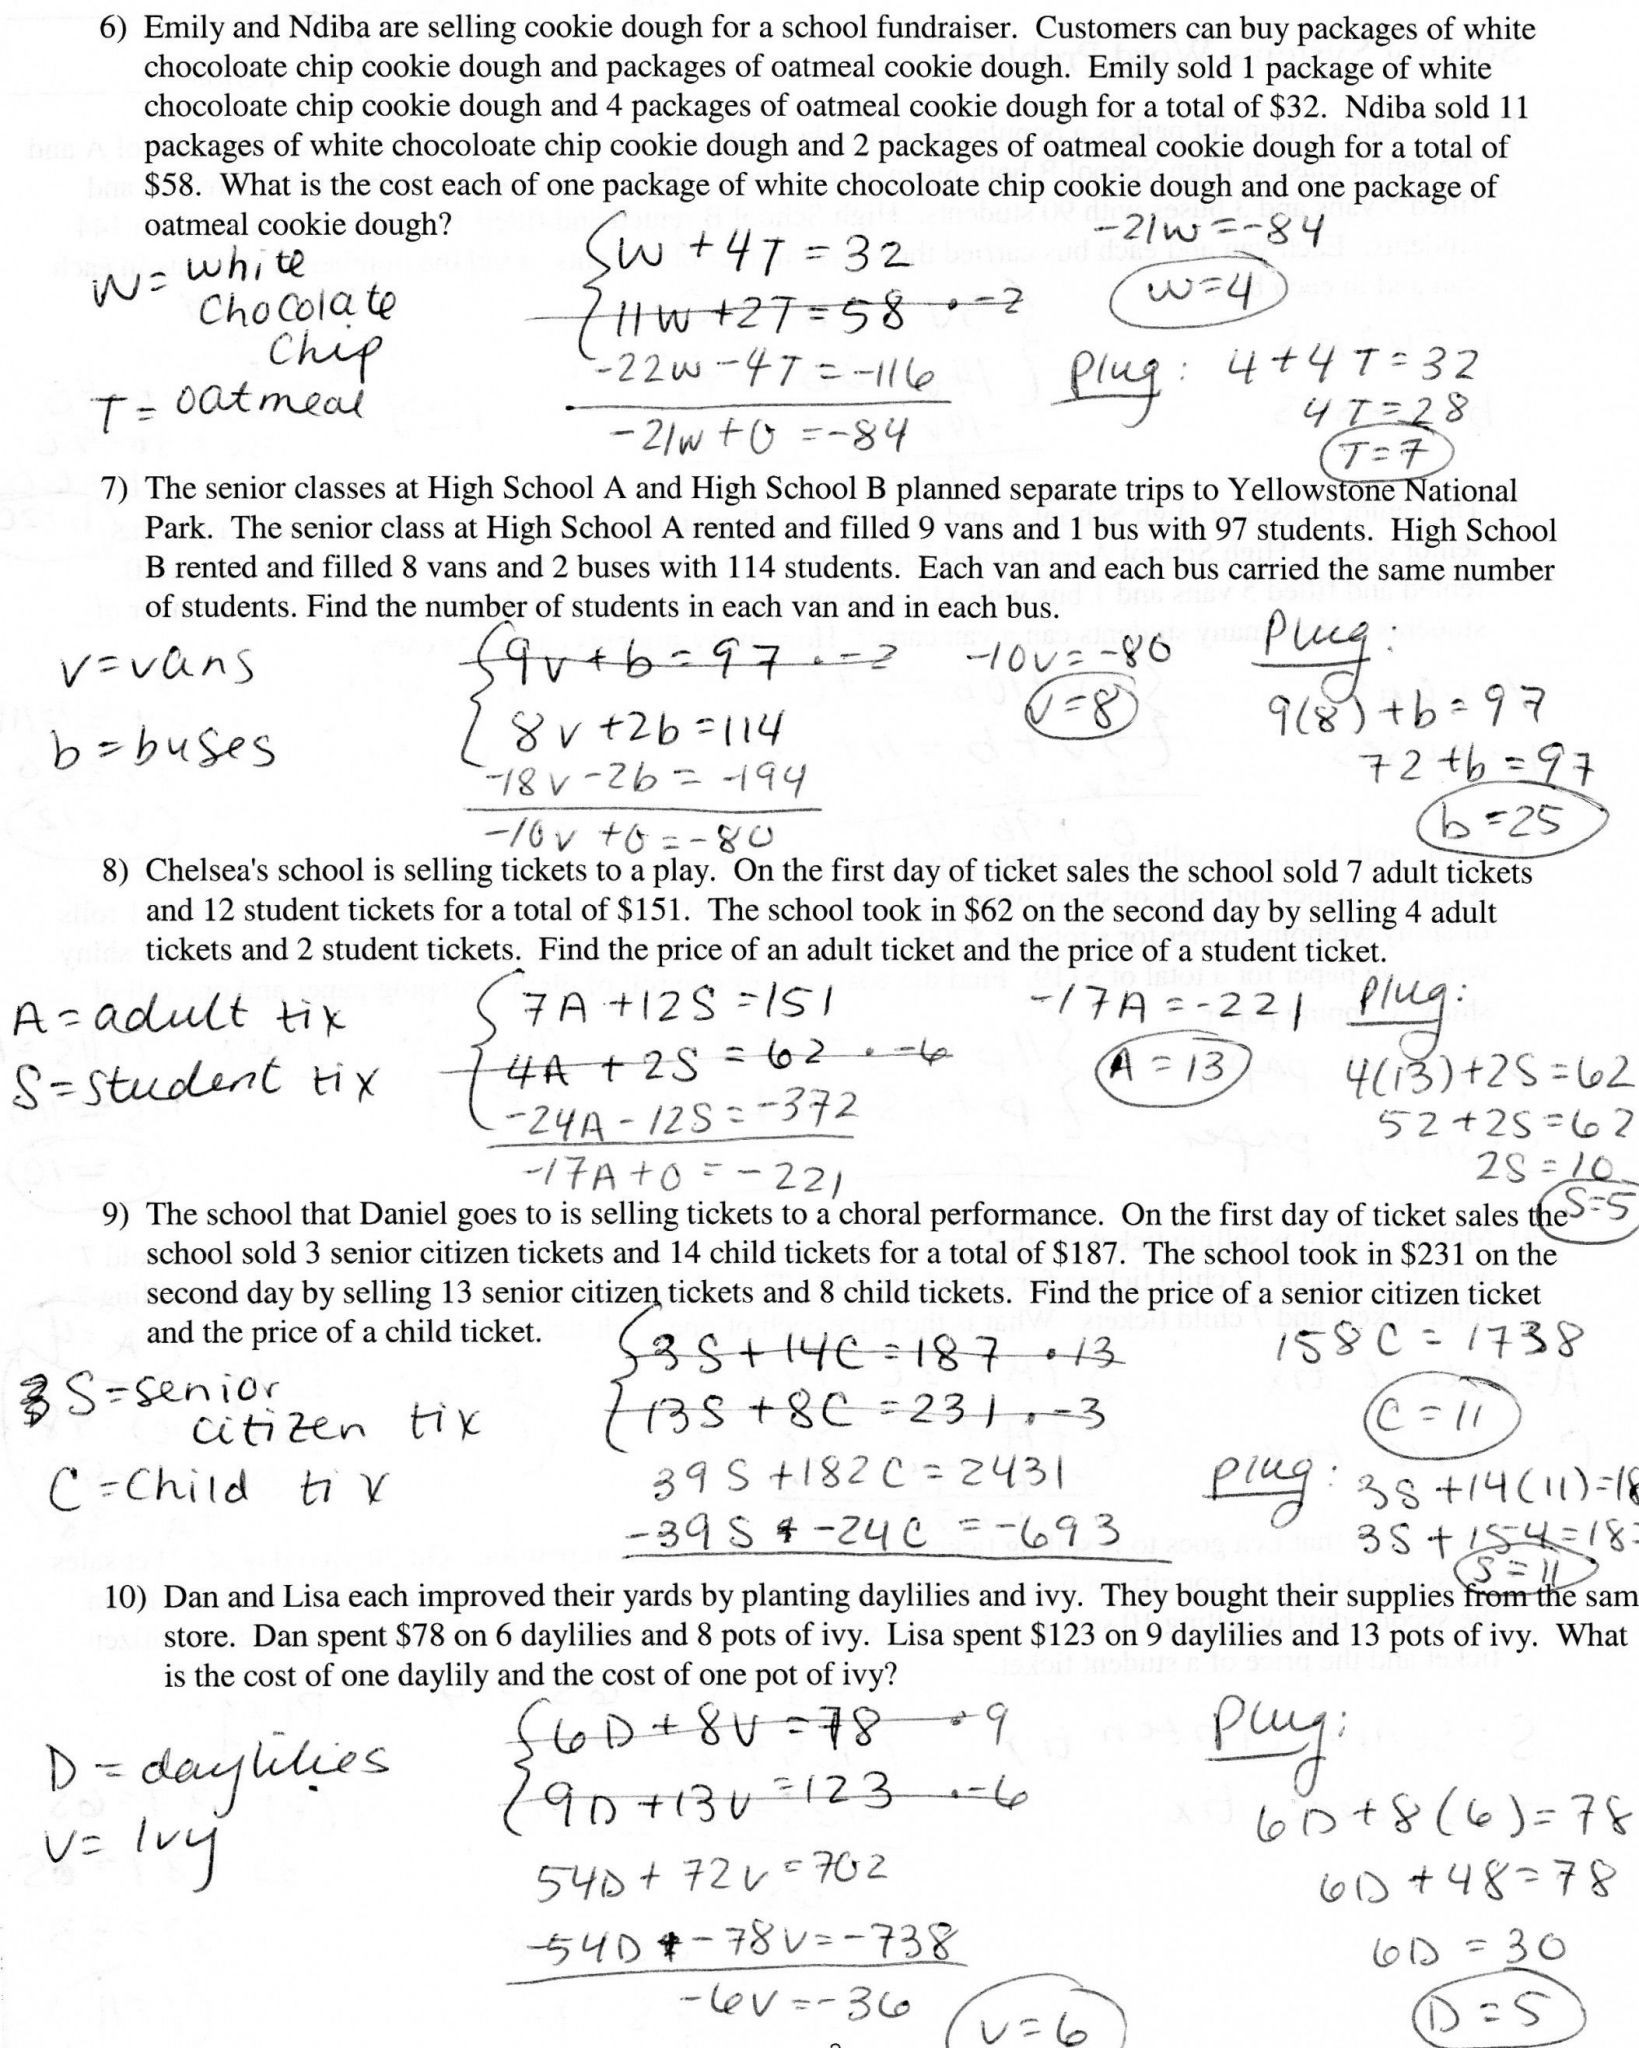 solving systems of equations by substitution worksheet pdf also solving systems equations by substitution word problems worksheet of solving systems of equations by substitution worksheet pd